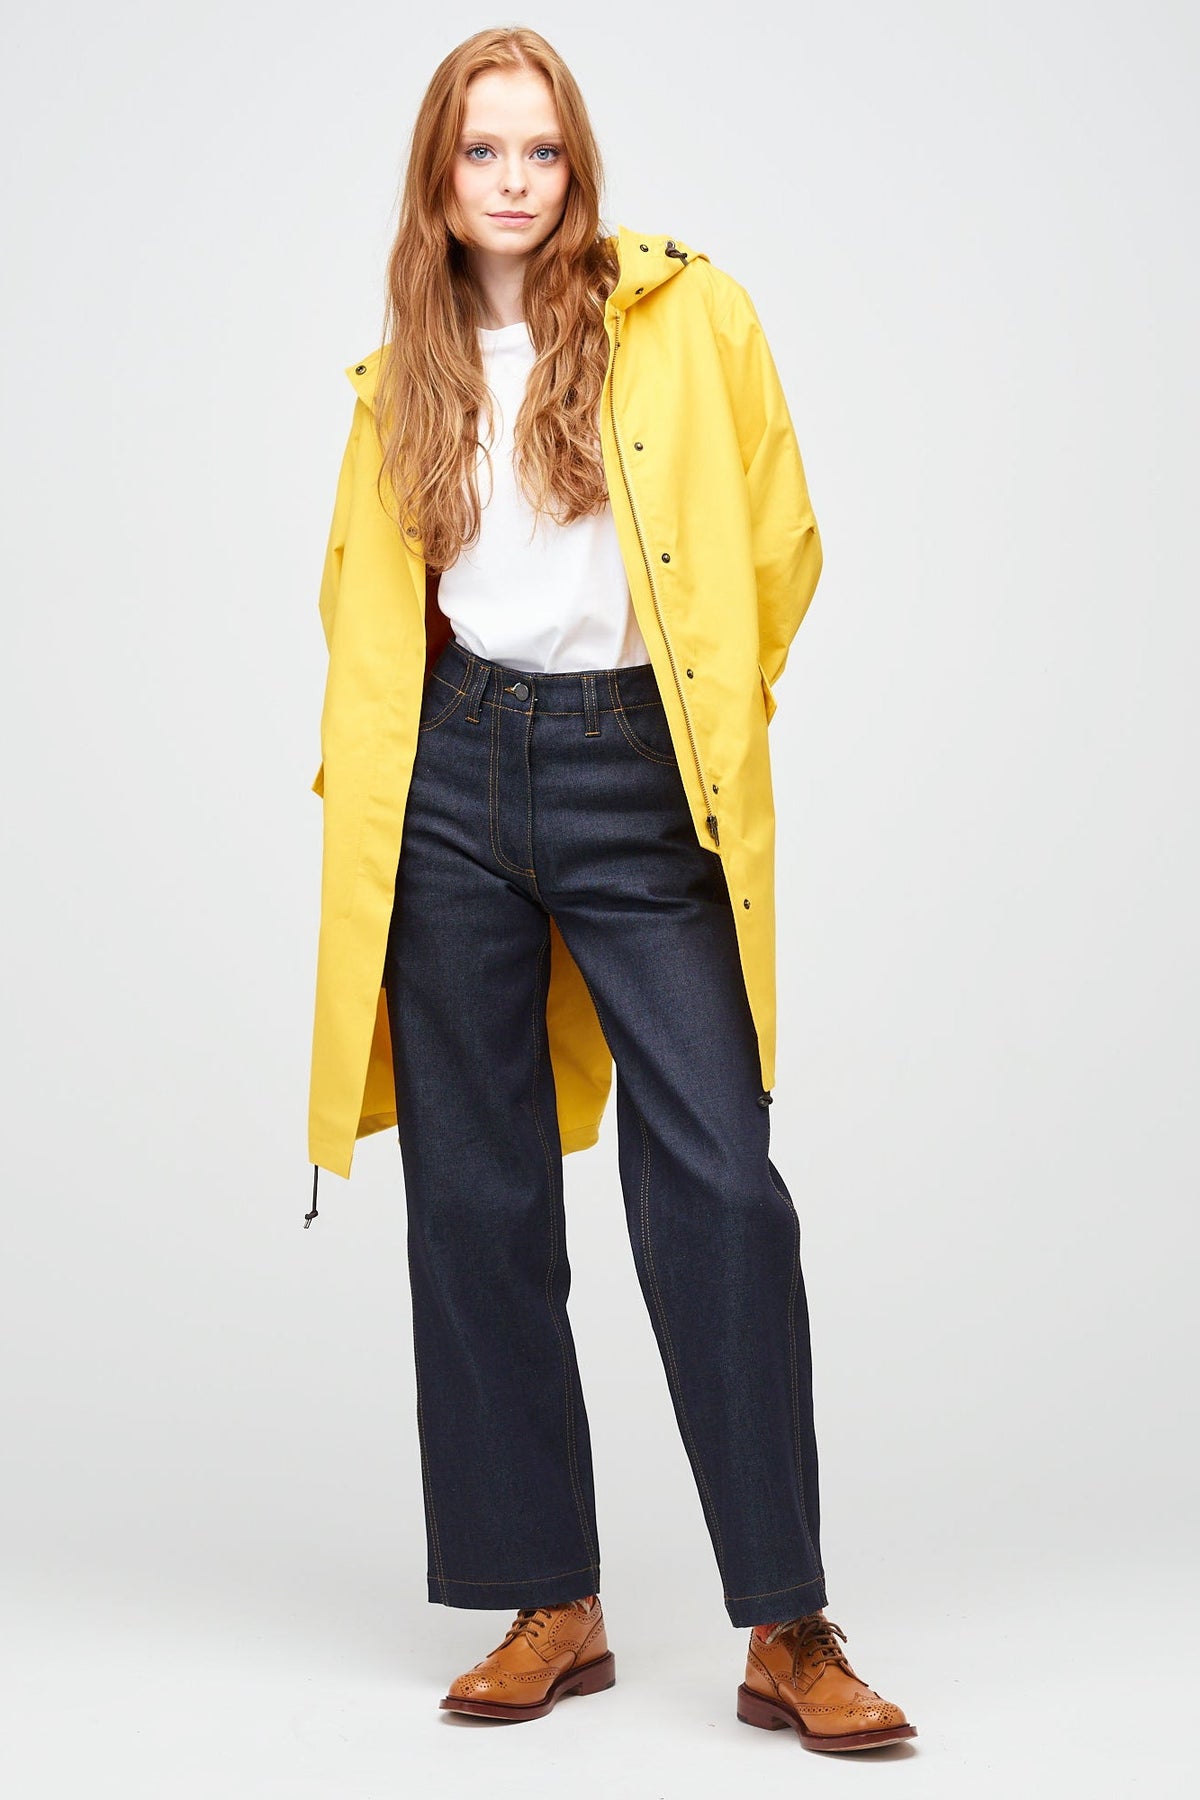 
            a young, white female model with ginger hair wearing long yellow parka unzipped. The parka is styled a white t-shirt, with indigo jeans and a white trainer.